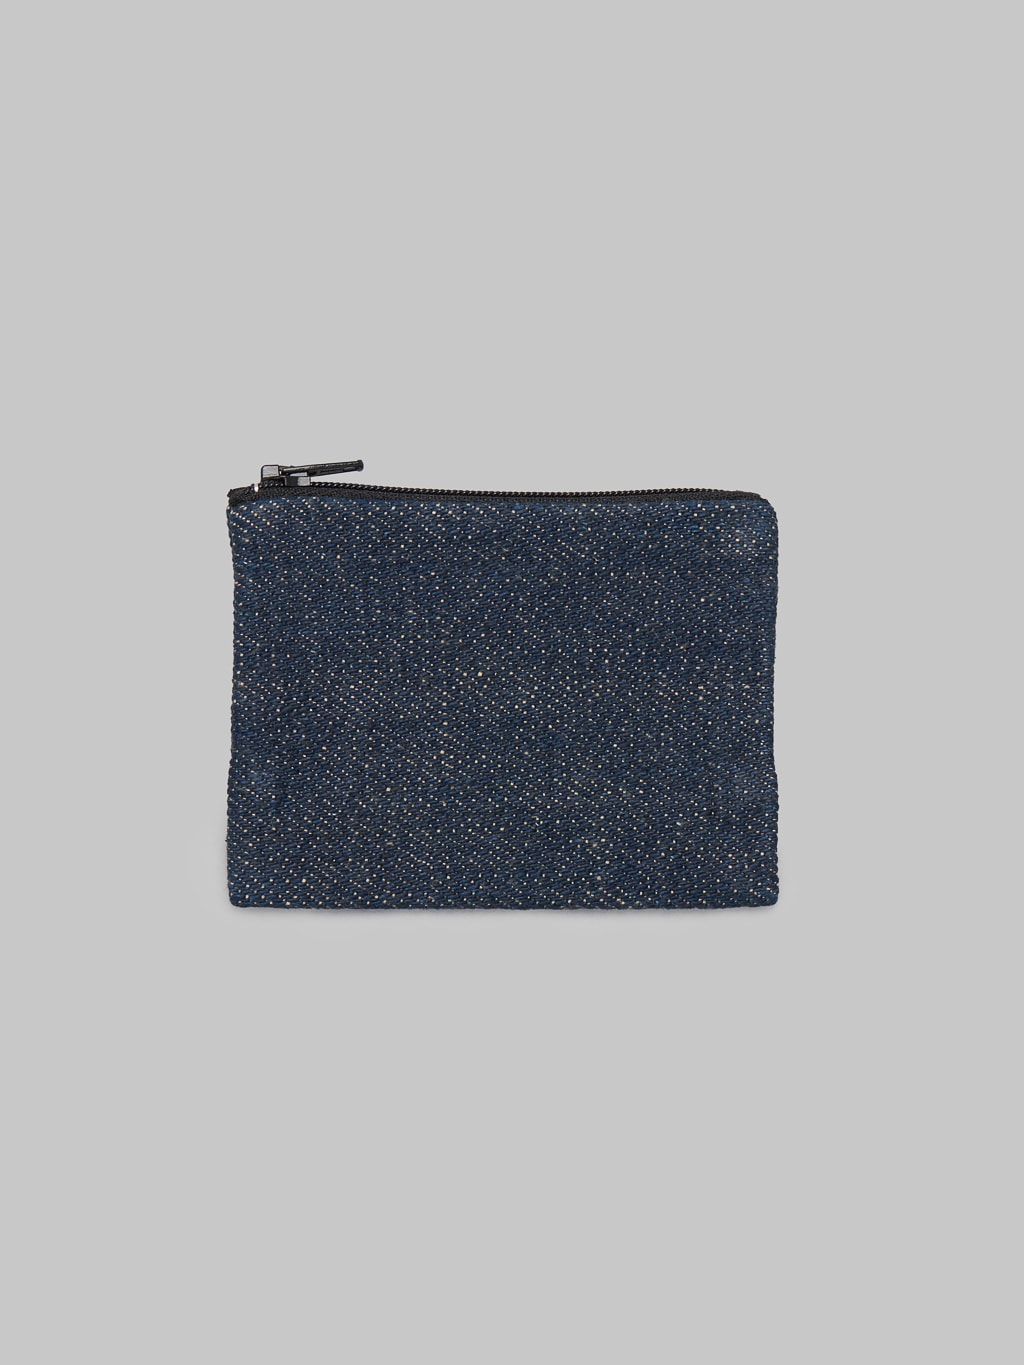 Oni denim selvedge coin pouch back view